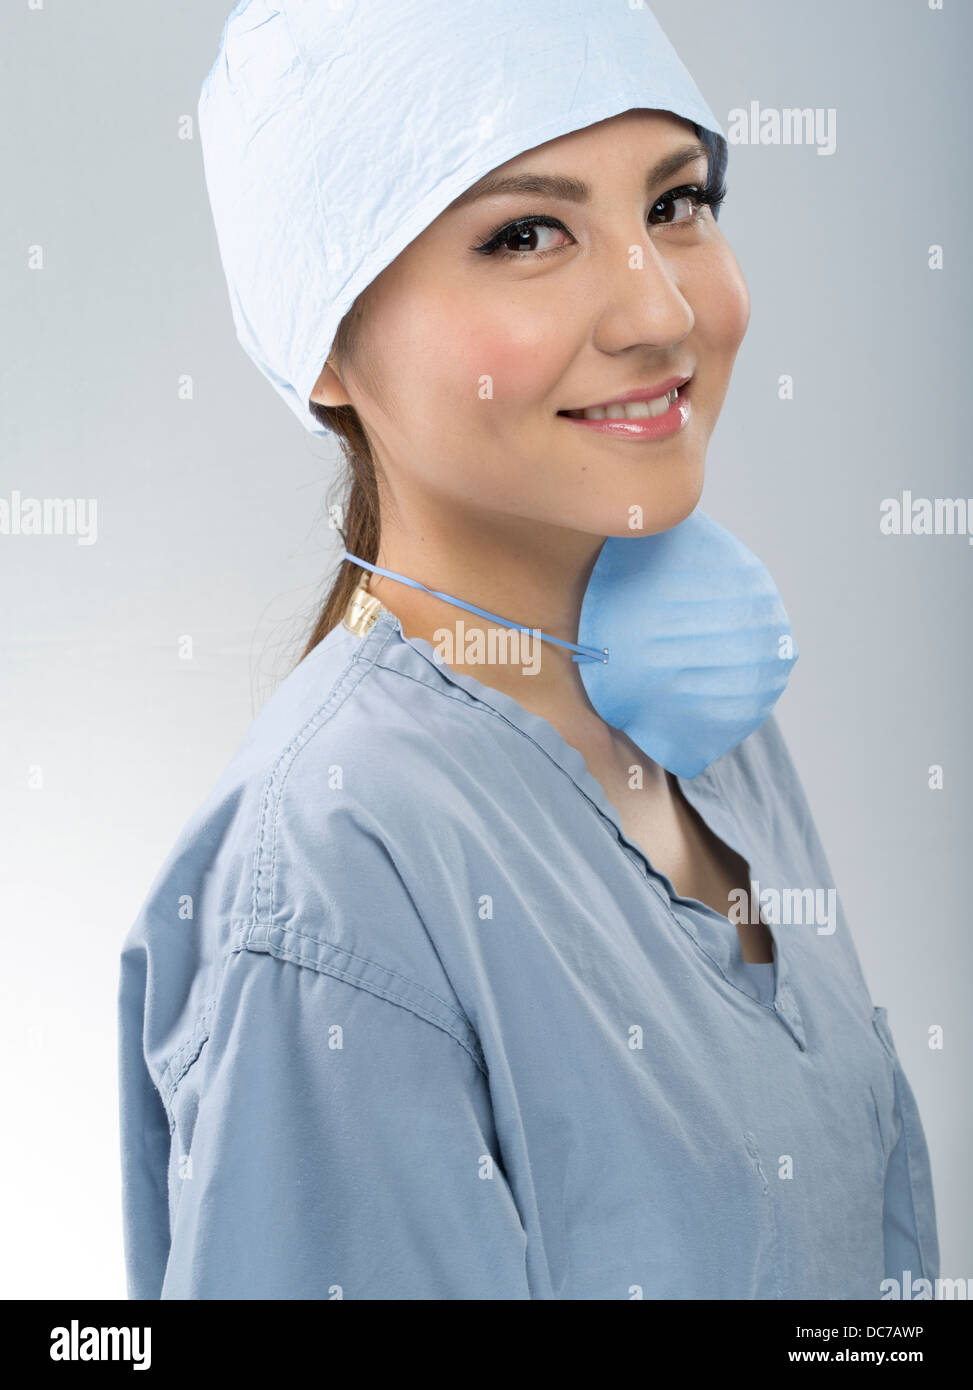 Female medic wearing surgical scrubs cap and mask Stock Photo